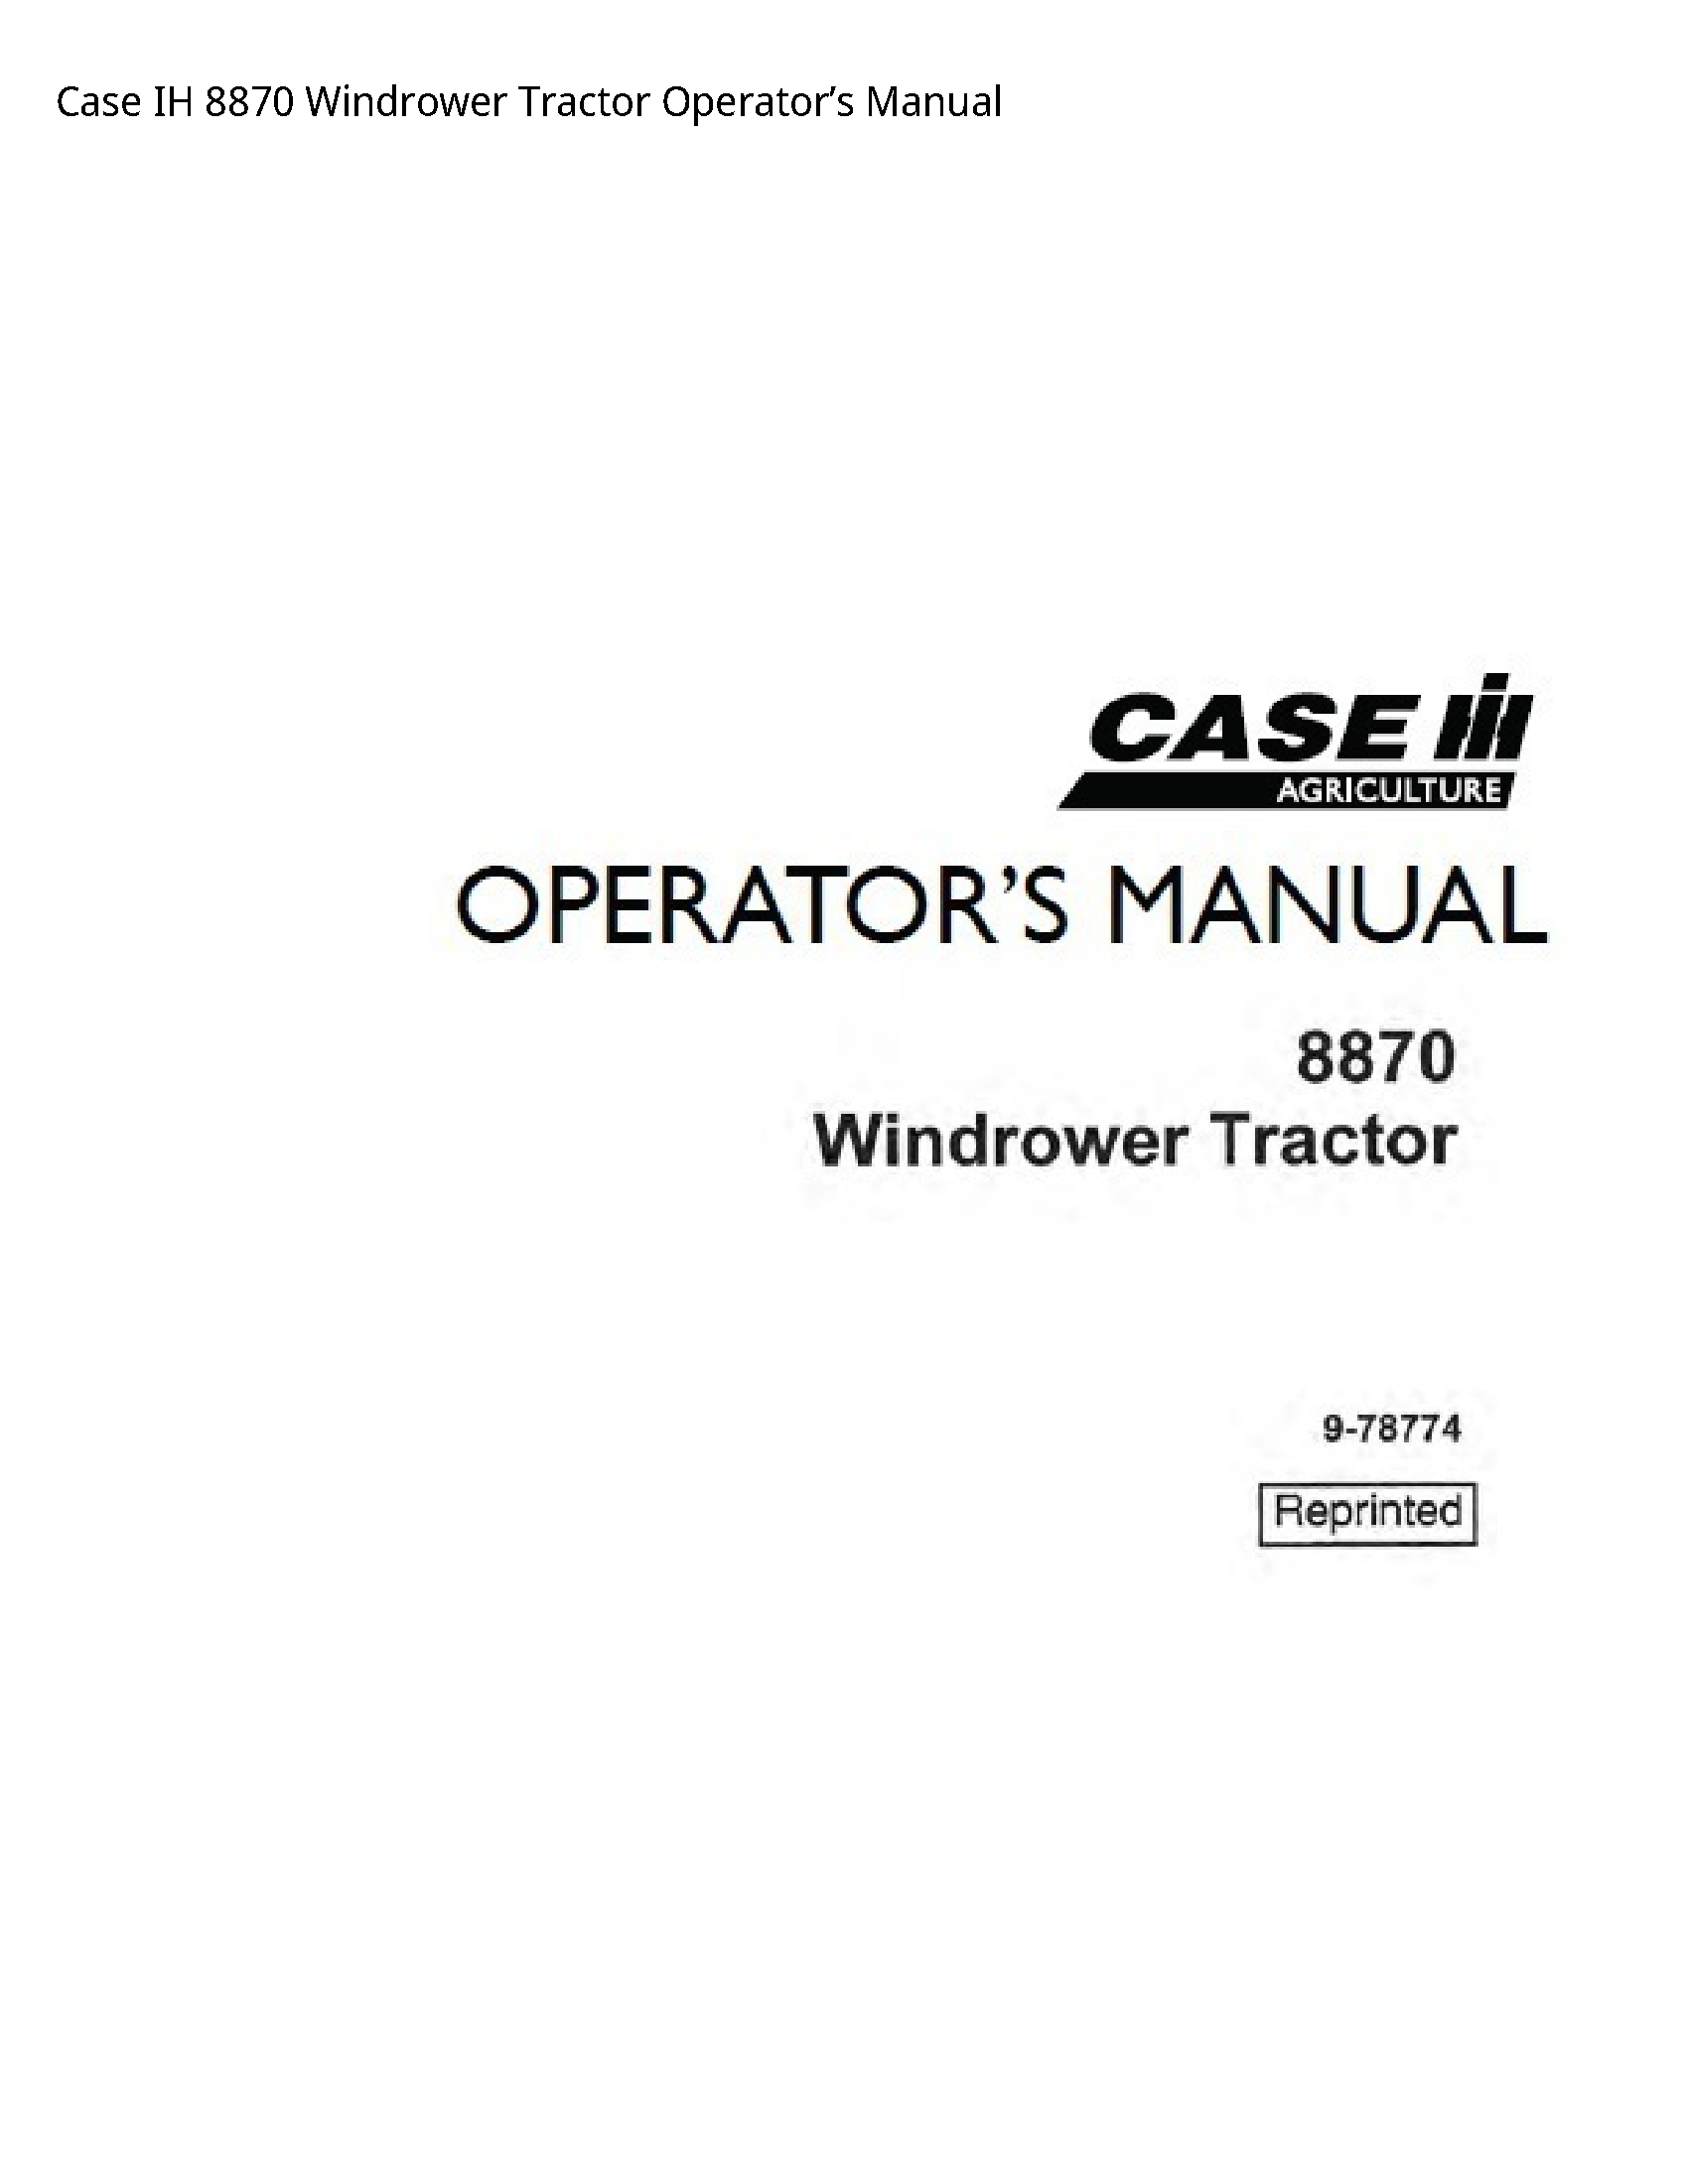 Case/Case IH 8870 IH Windrower Tractor Operator’s manual